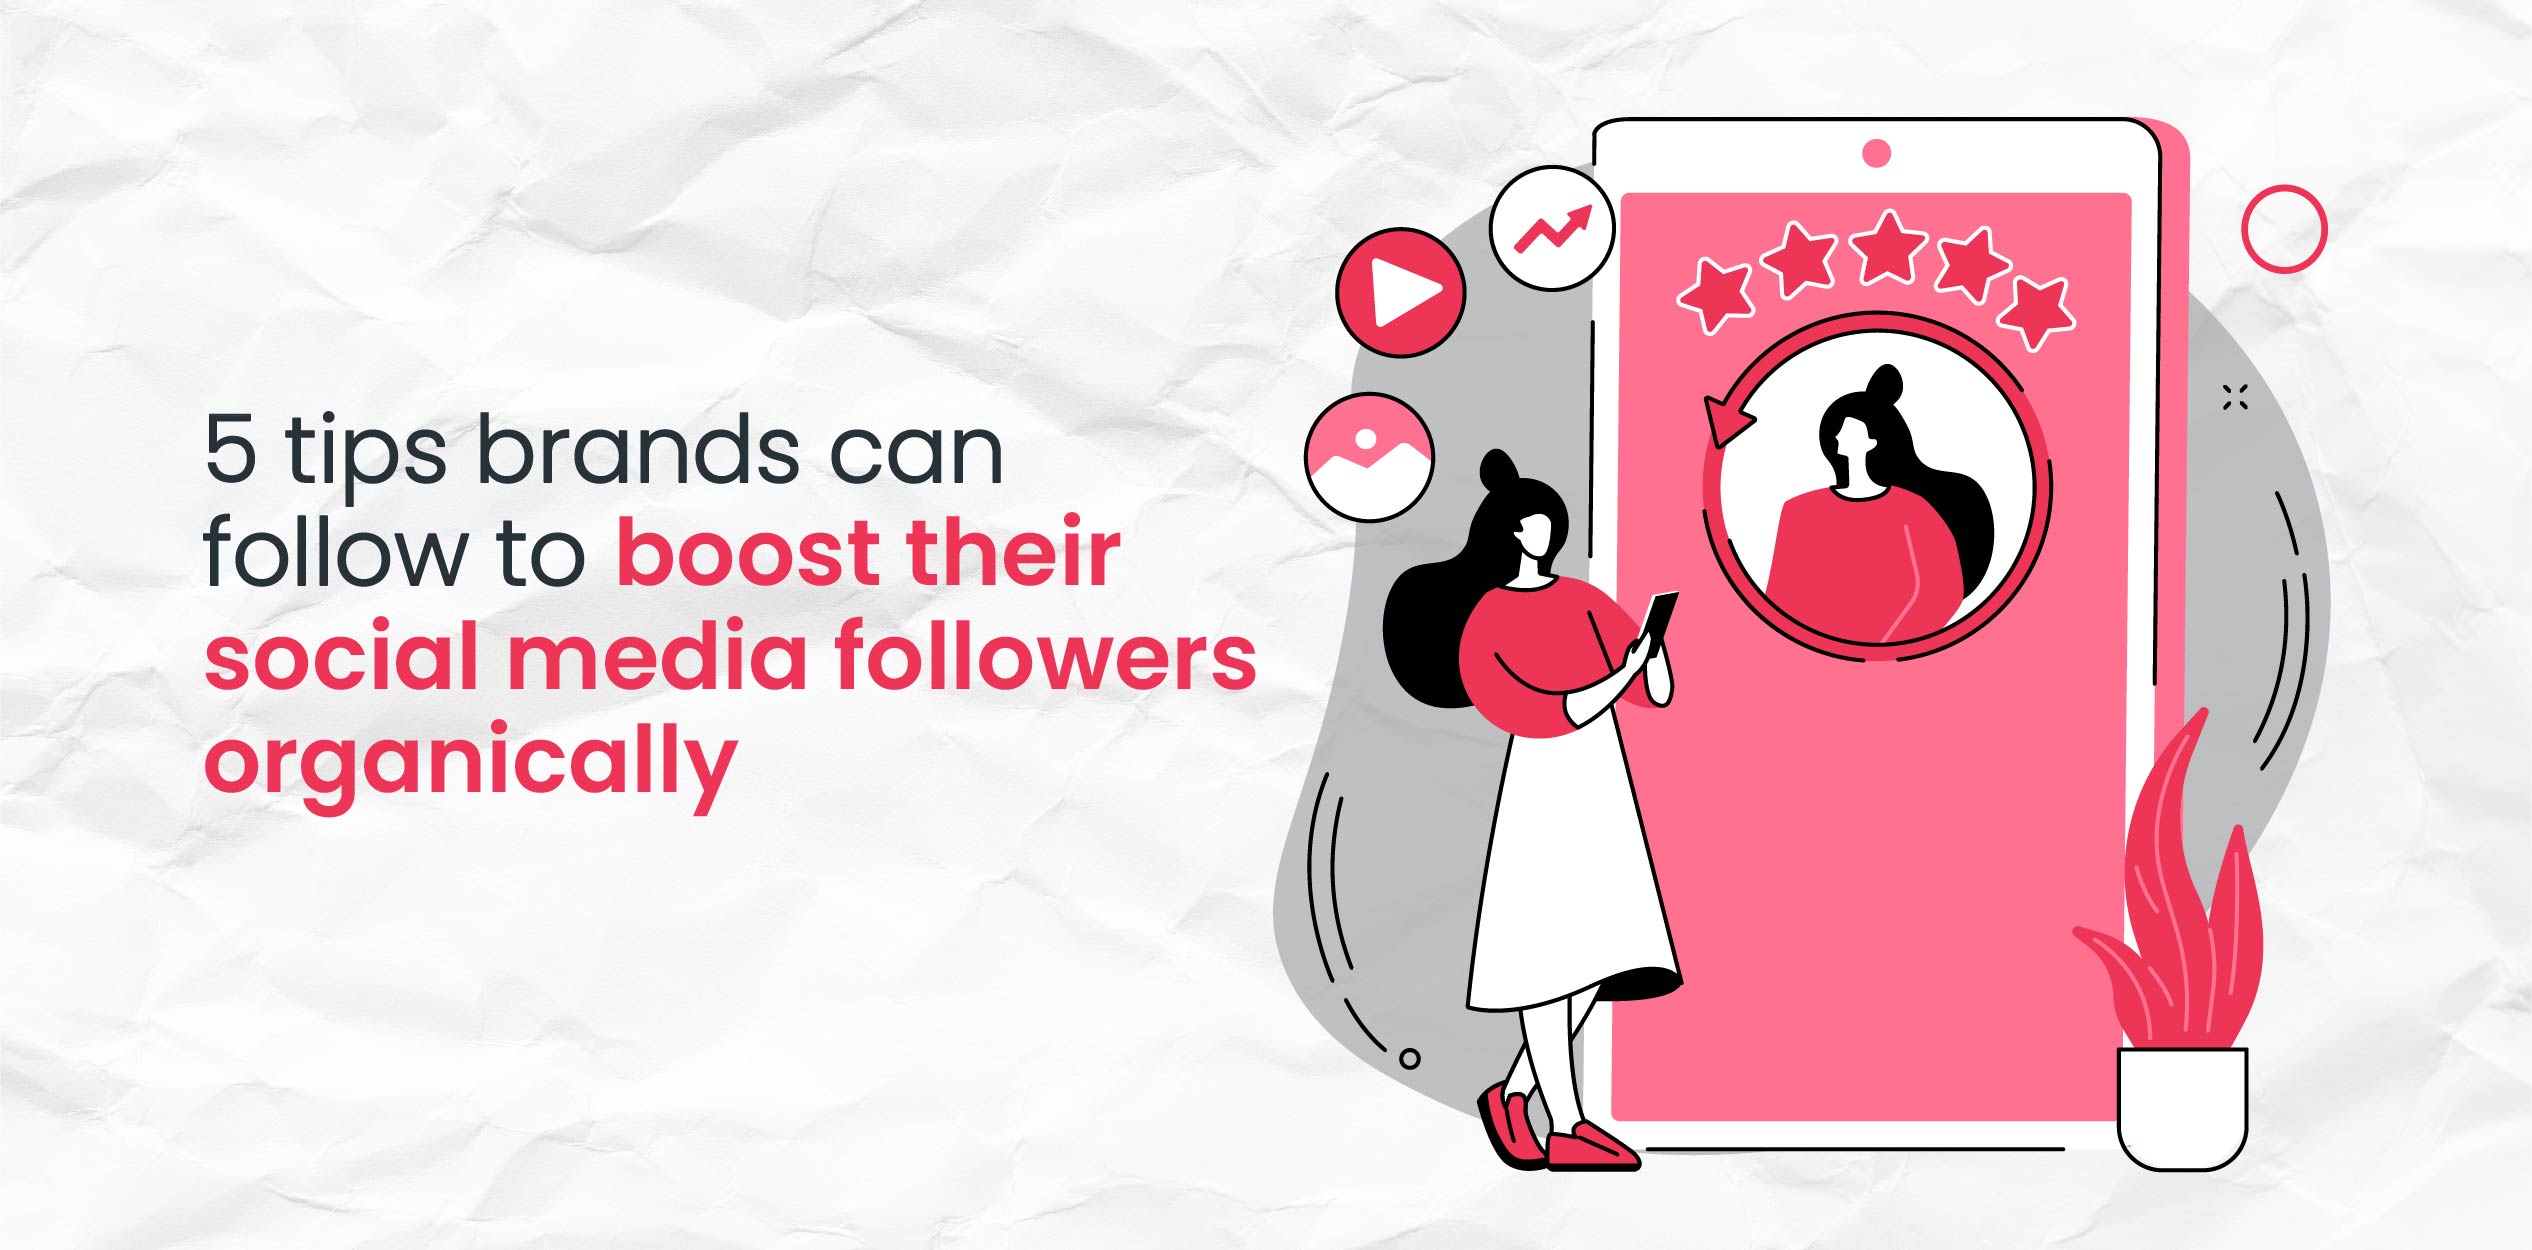 5 tips brands can follow to boost their social media followers organically